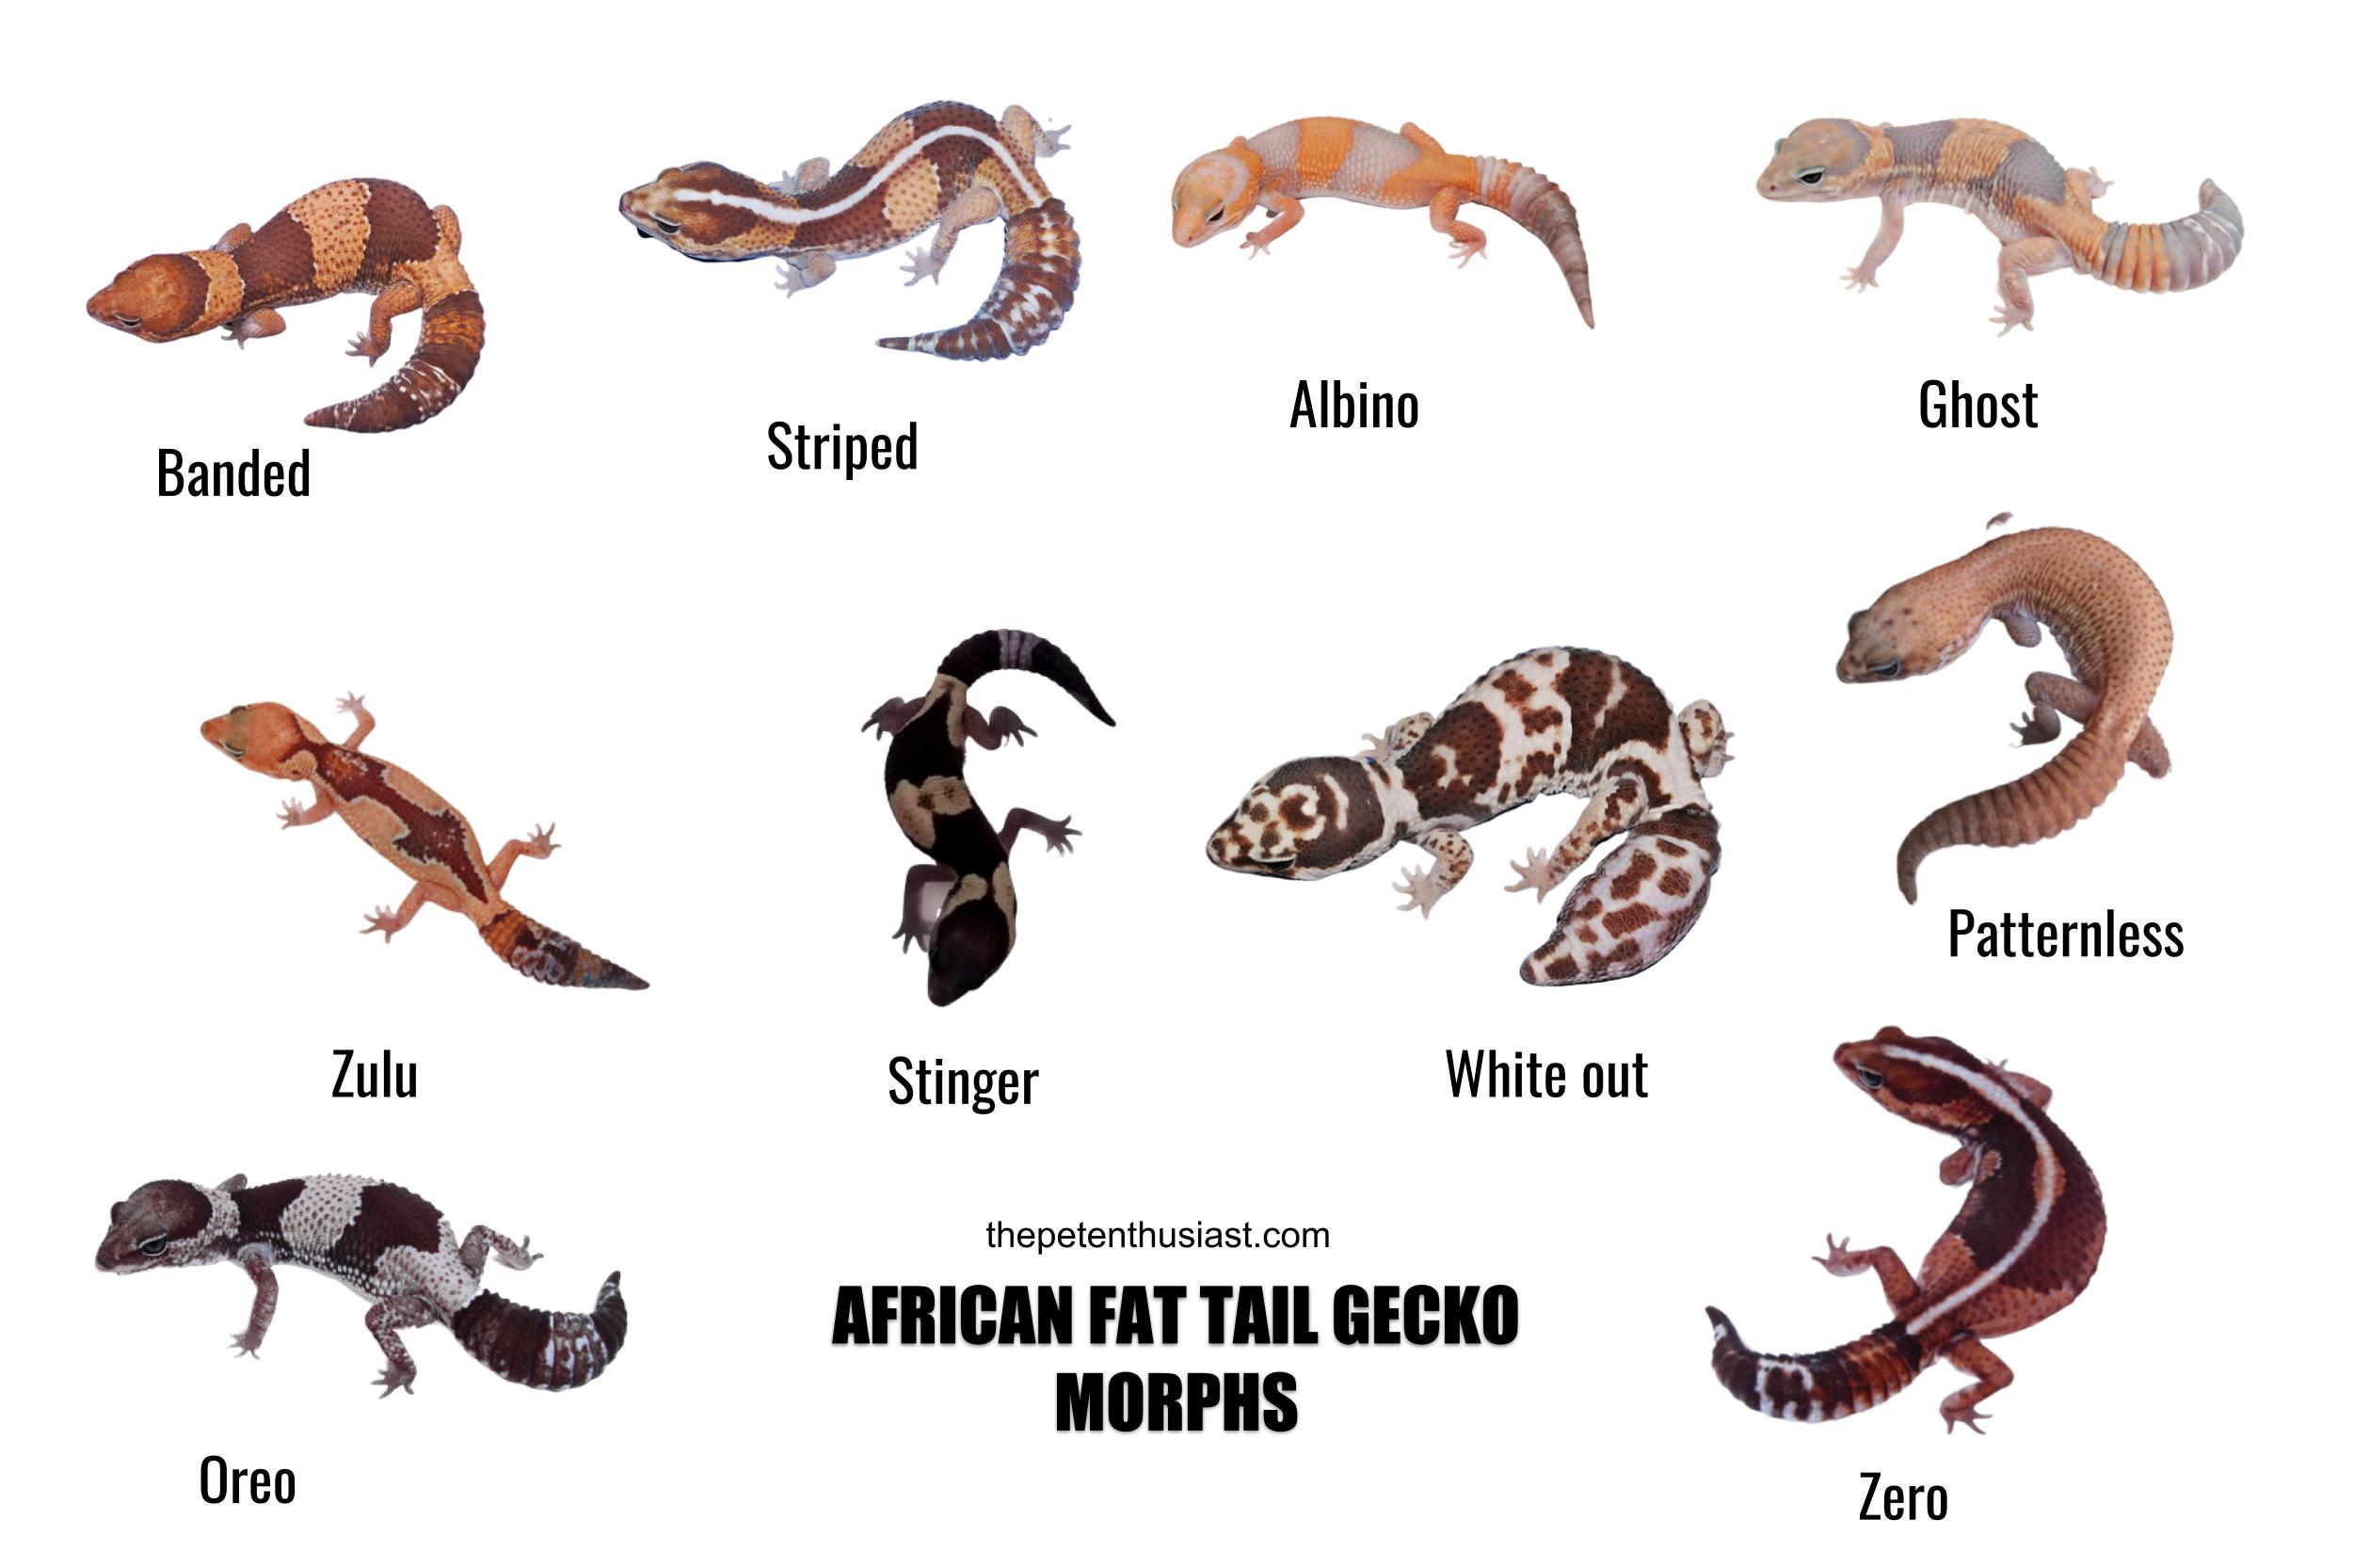 A quick guide about African fat tail gecko morphs